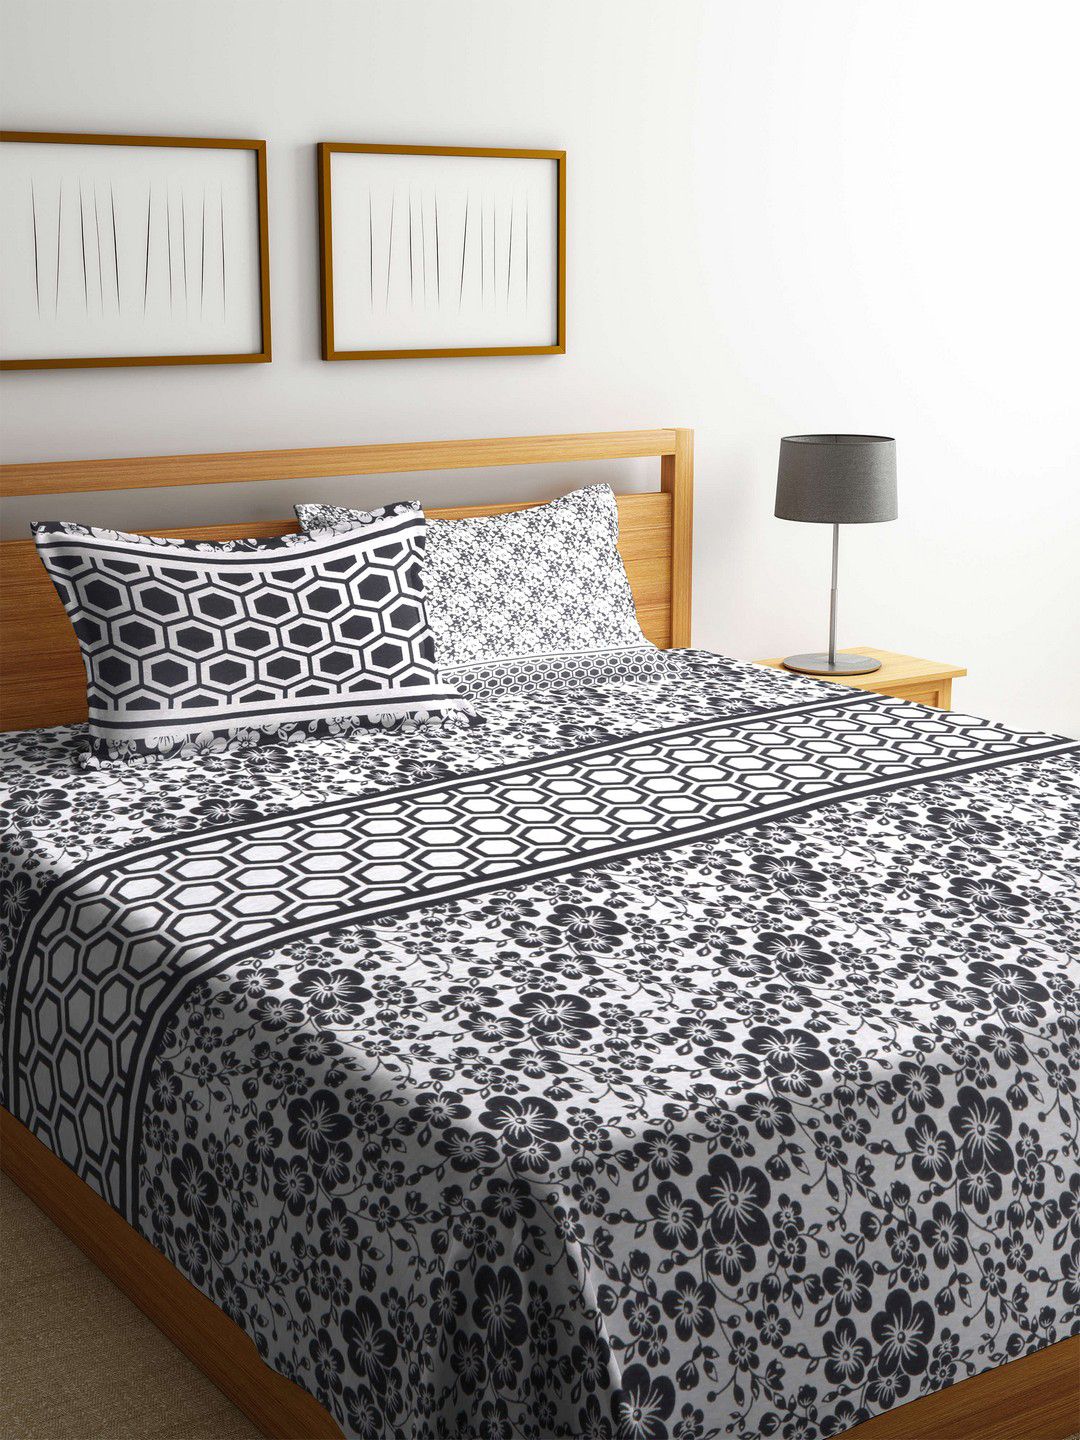 Romee Black & White Printed Polycotton Reversible Double Bed Cover with 2 Pillow Covers Price in India